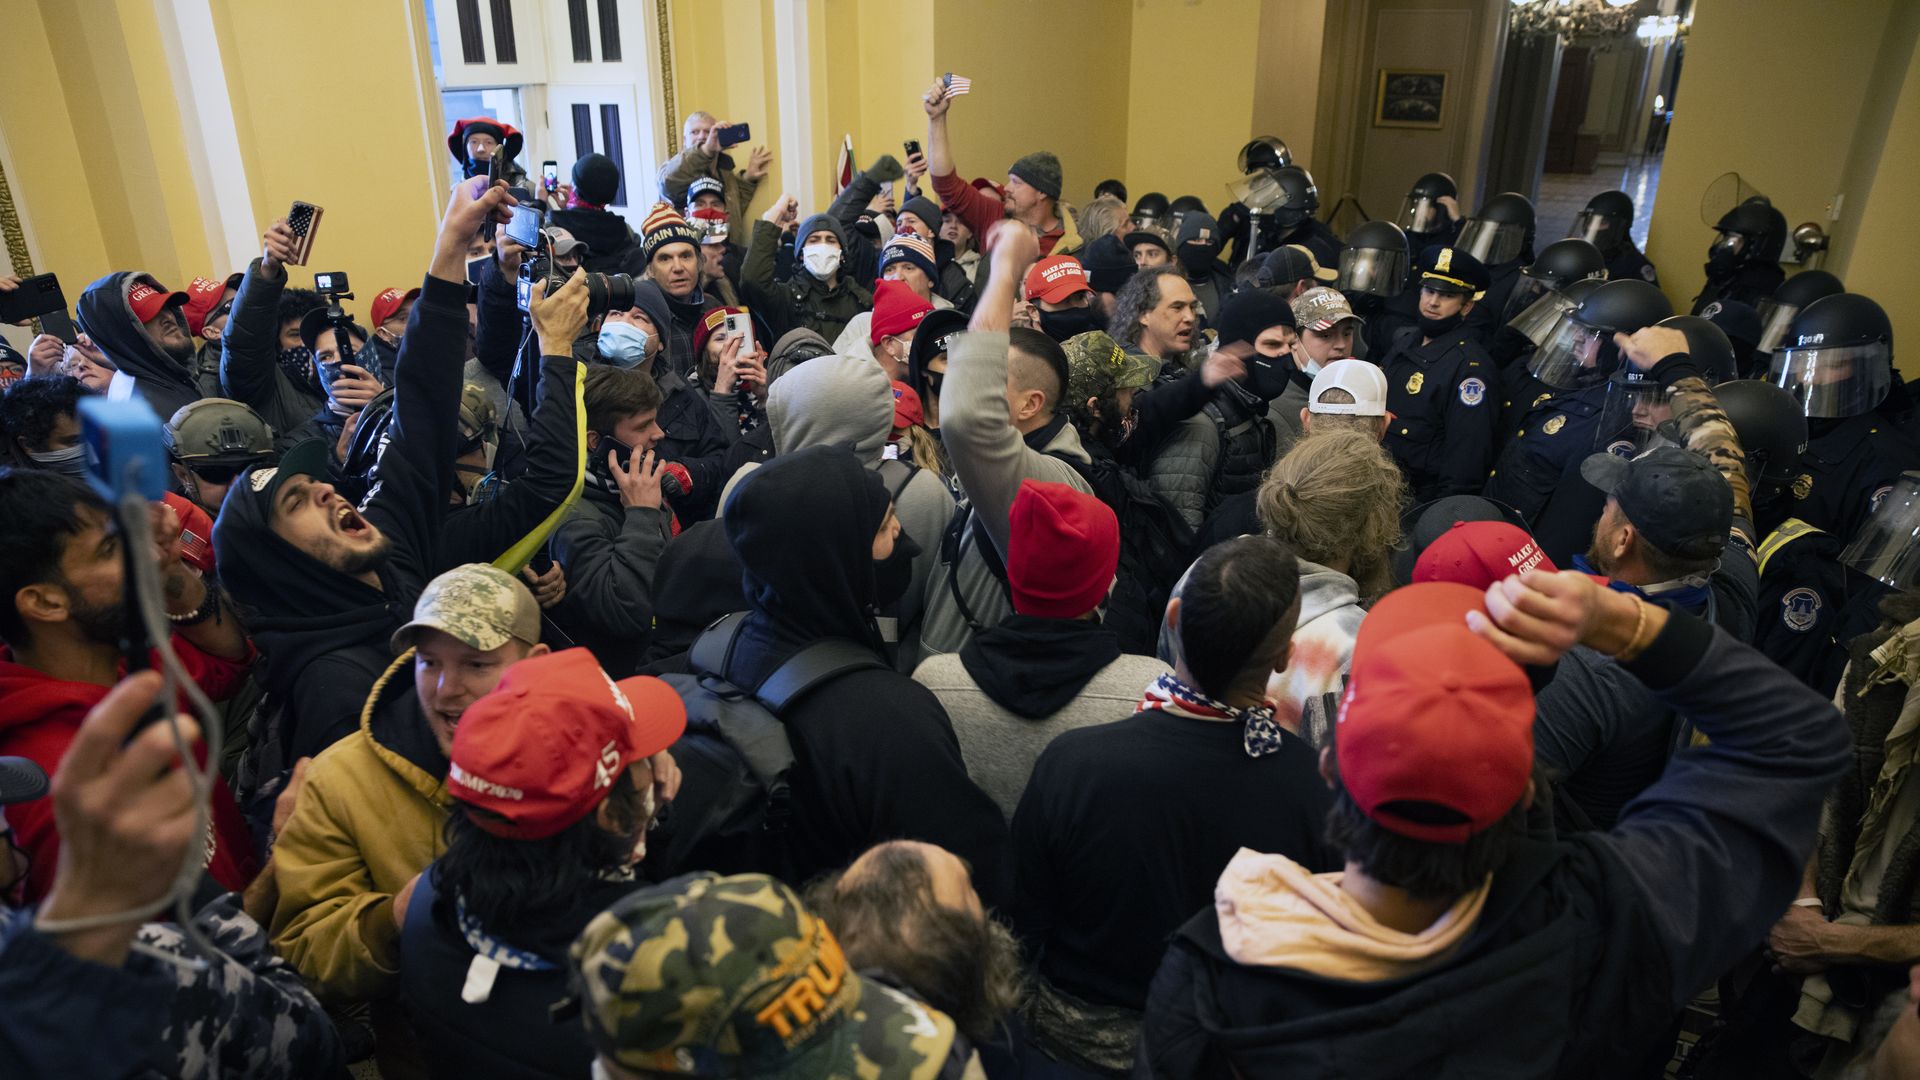 Supporters of US President Donald Trump protest inside the US Capitol on January 6, 2021, in Washington, DC. Demonstrators breeched security and entered the Capitol as Congress debated the 2020 presidential election Electoral Vote Certification. (Photo by Brent Stirton/Getty Images)